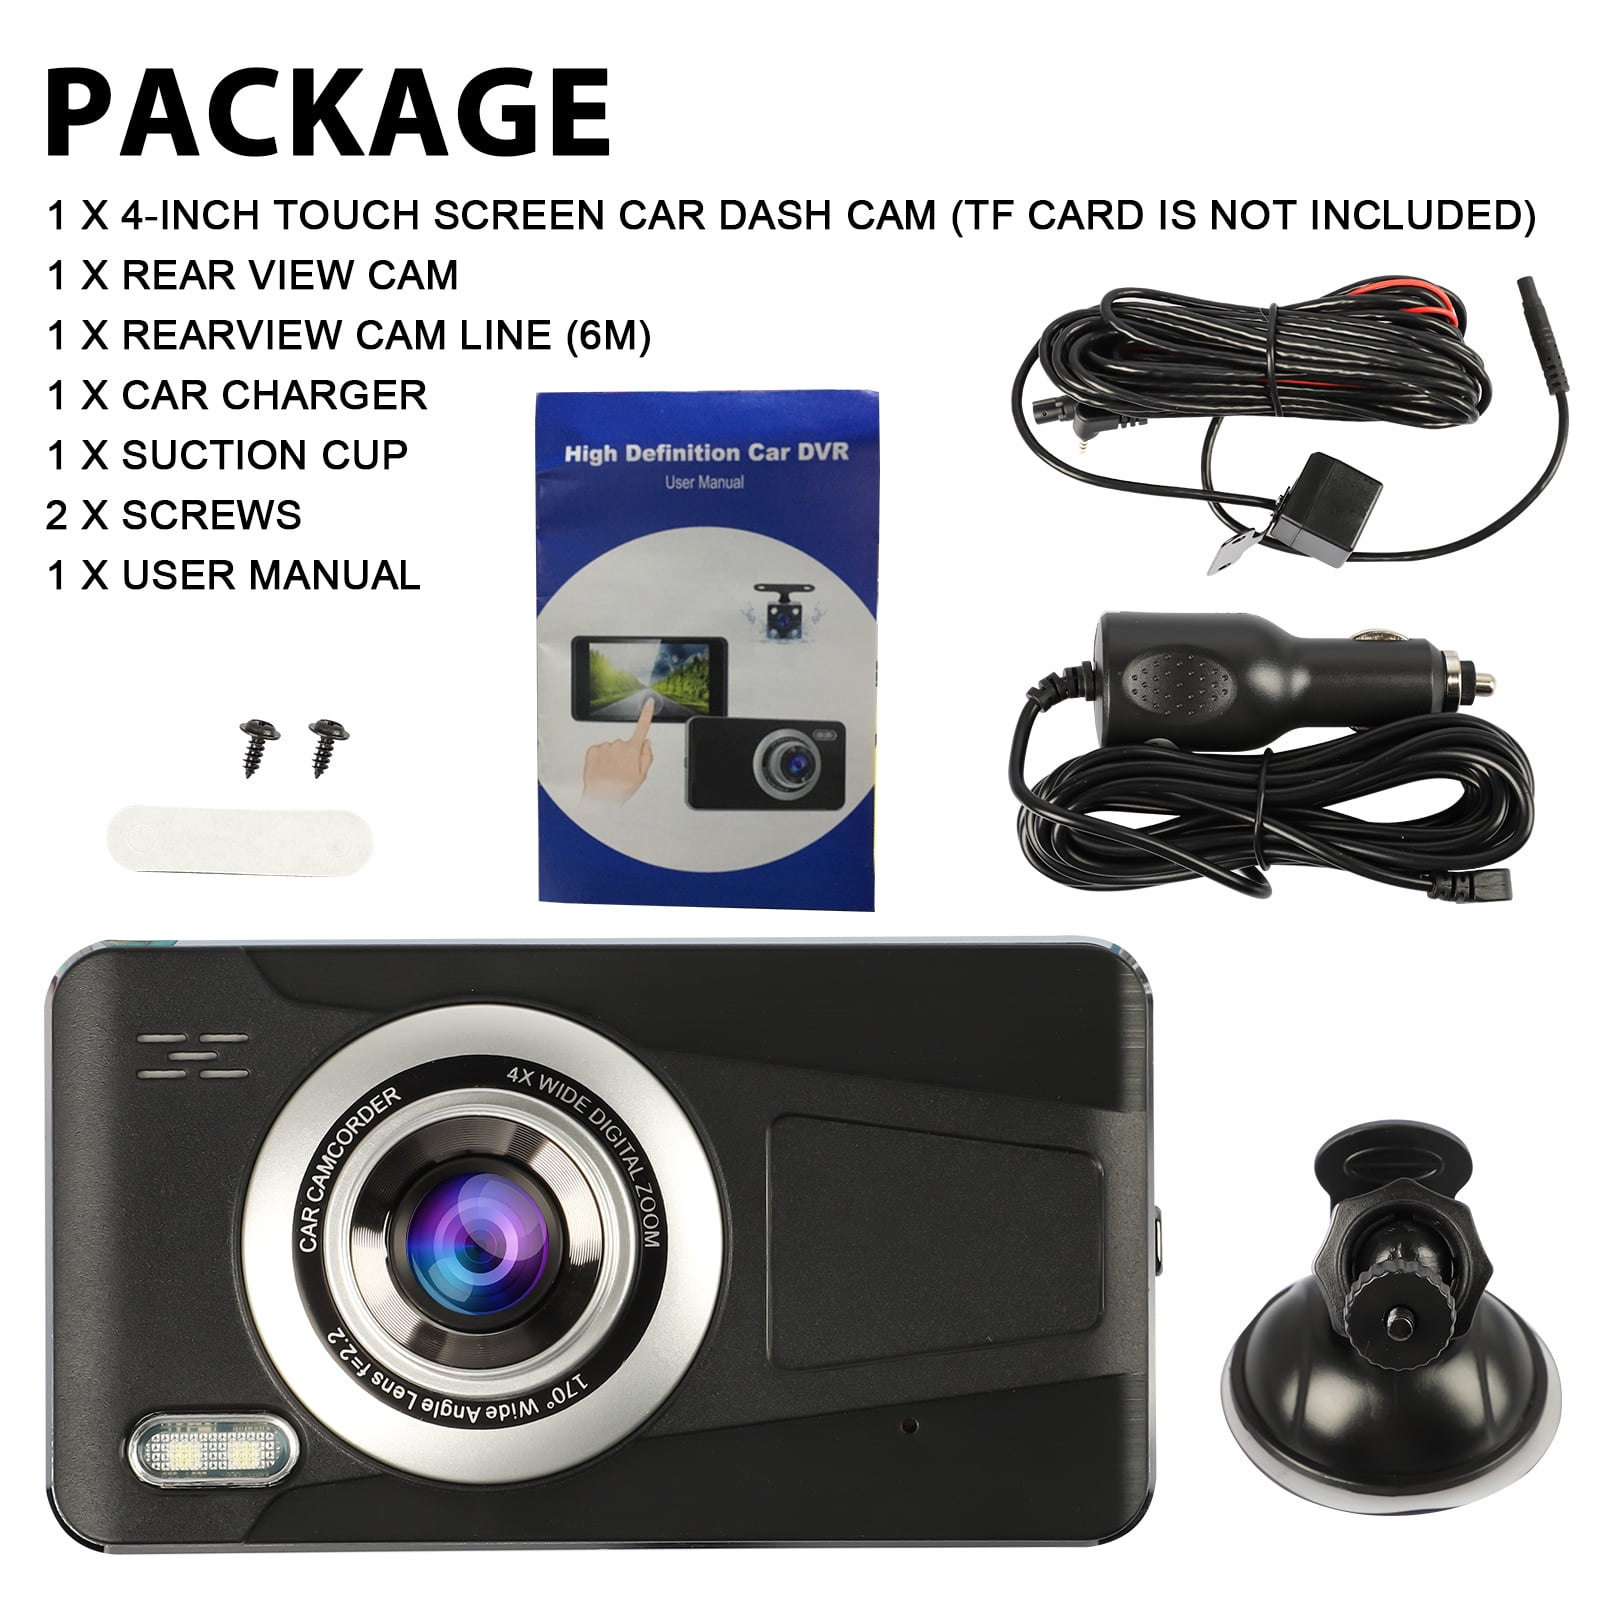  Dual Dash Cam Front and Rear Dash Cam 4.0 Inch IPS Touch Screen  Night Vision 1080P HD LCD DVR Video Car Dashboard Dash Camera Recorder  140°Wide Angle,WDR G-Sensor,Parking Monitor,Loop Recording 